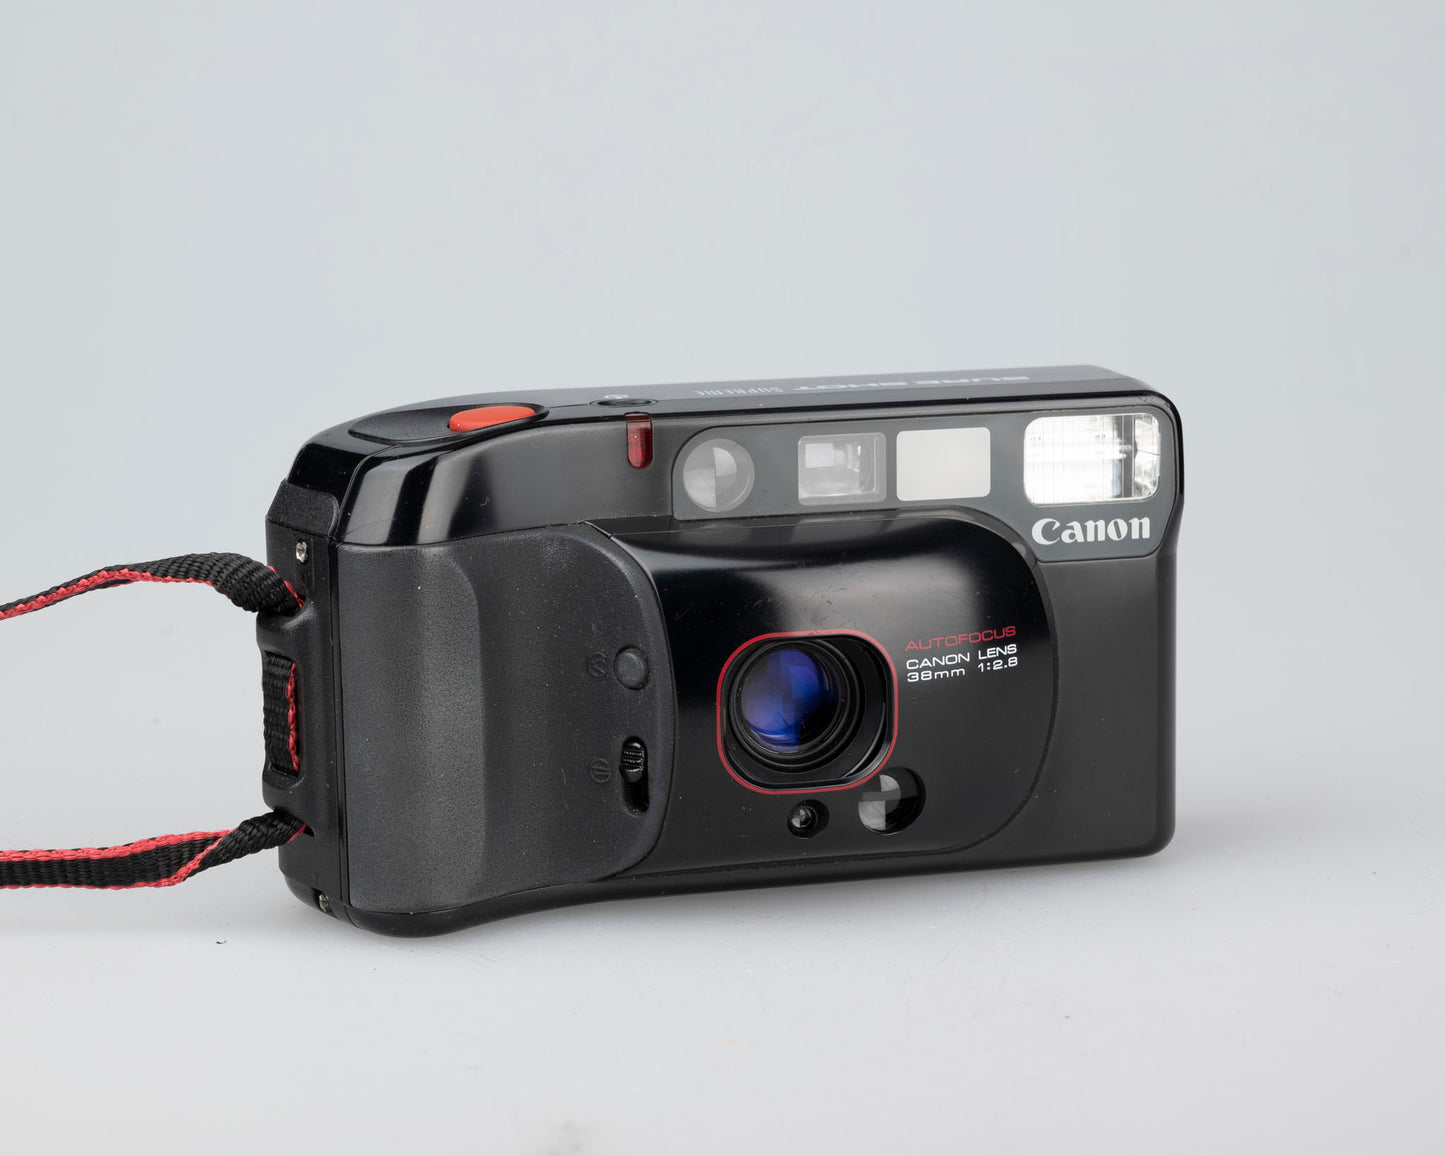 This film-tested Canon Sure Supreme 35mm camera is available at www.newwavepool.shop